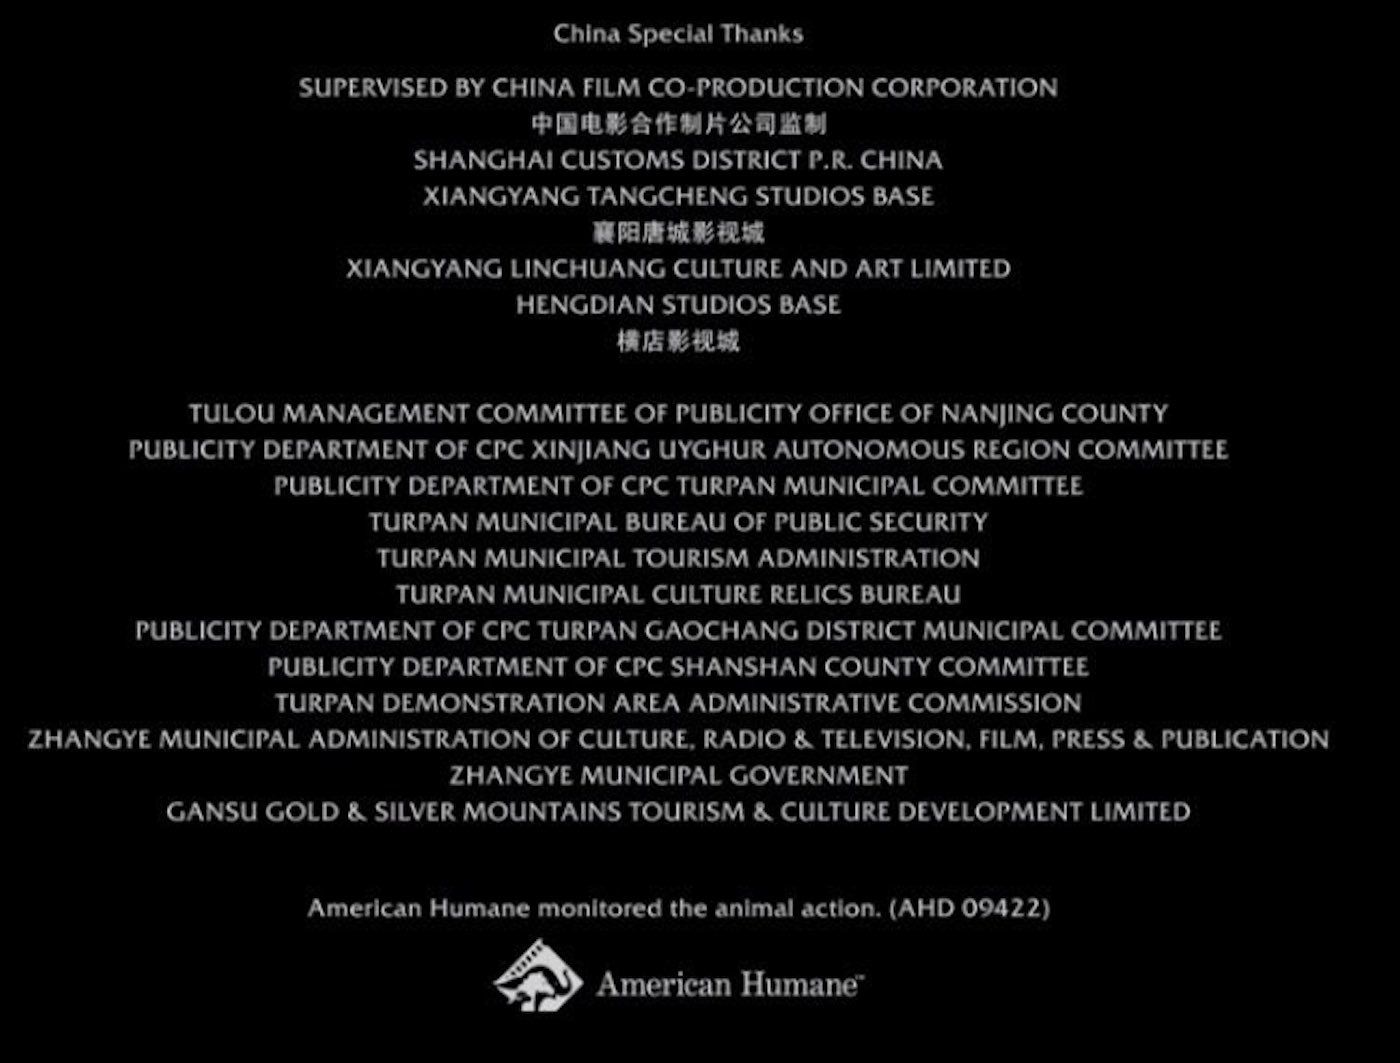 A screen grab of the credits for the film Mulan, in which Disney thanks the Chinese Communist Party.